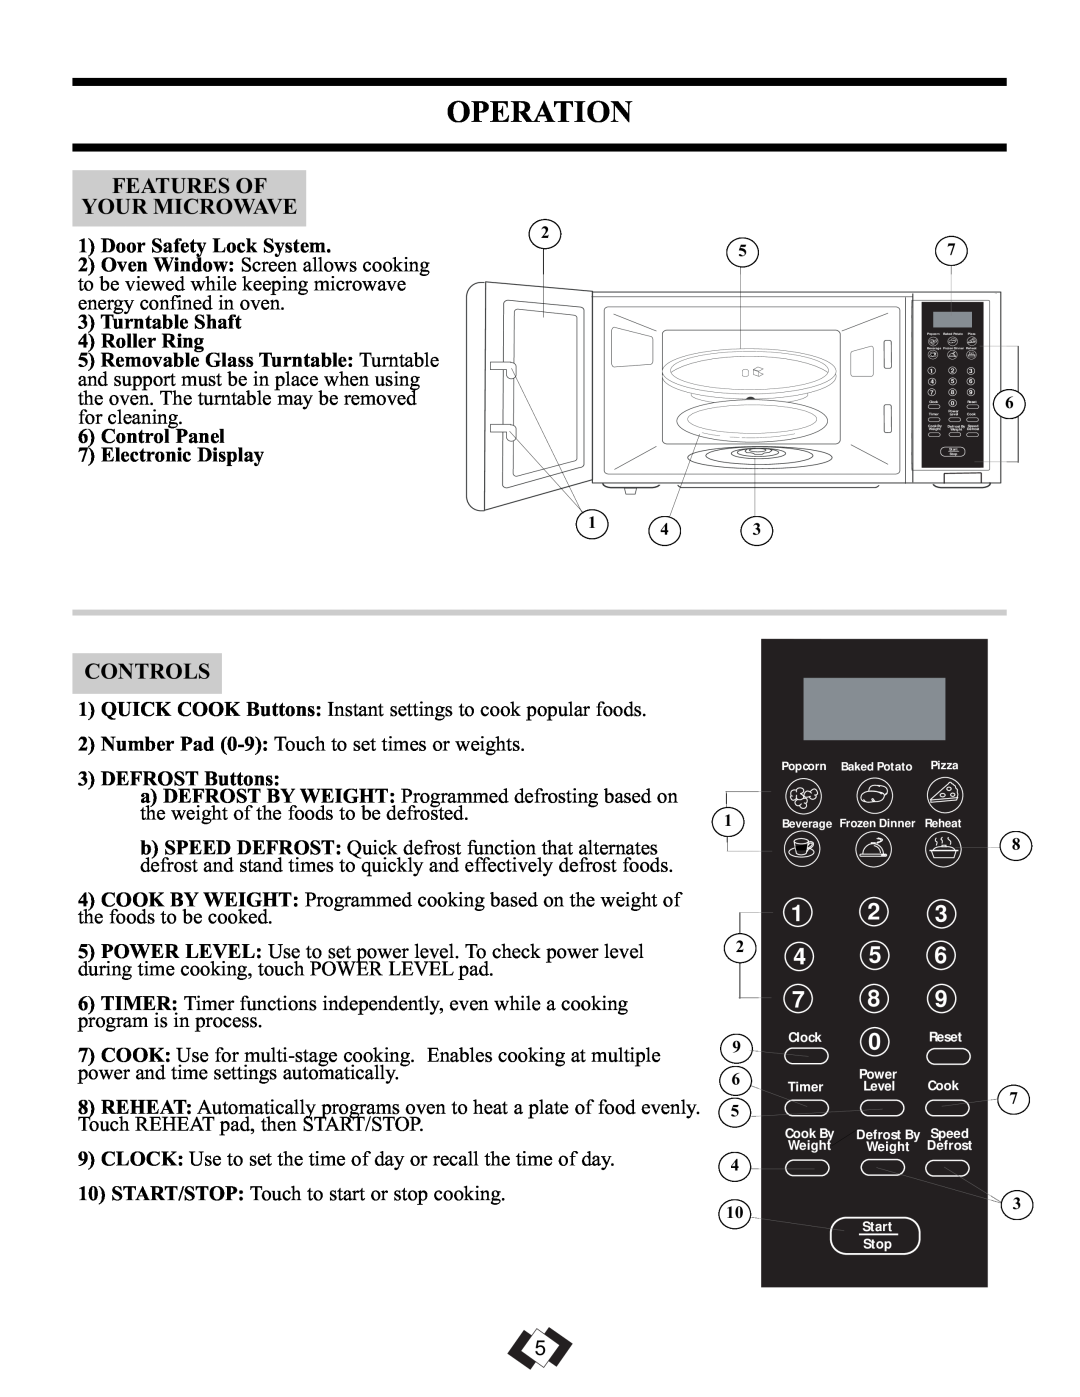 Sunbeam SBMW1049SS warranty Operation, Features Of Your Microwave, Controls 